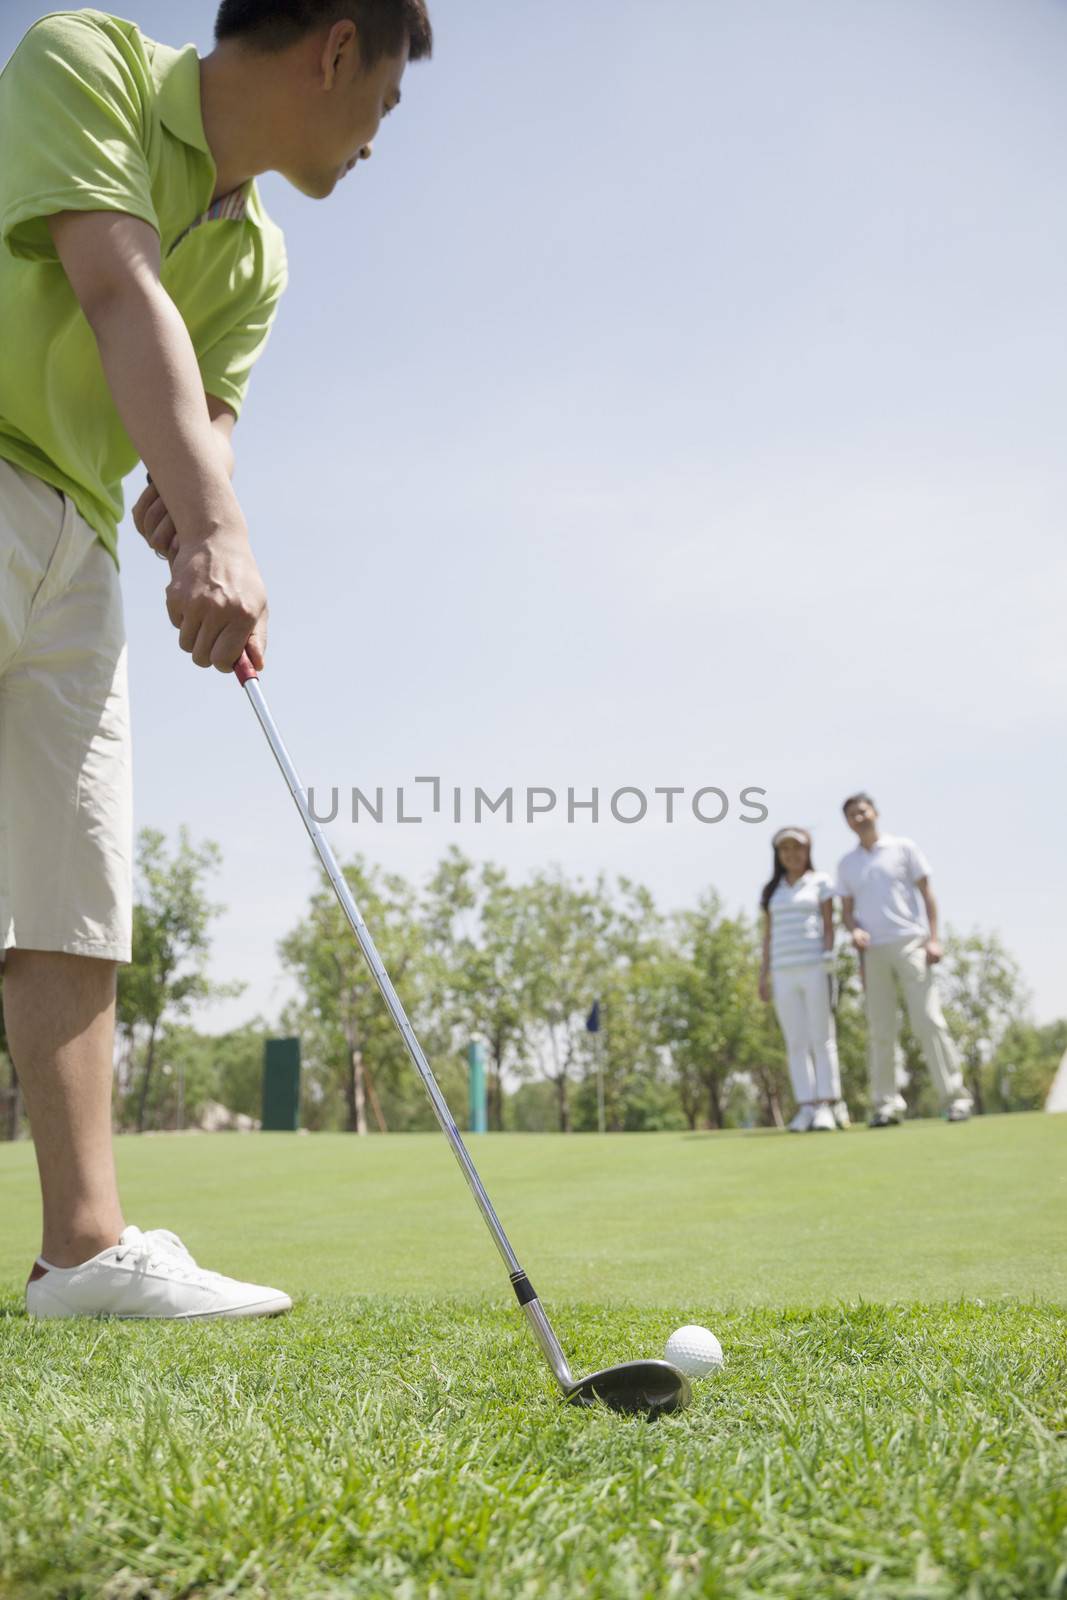 Young man hitting a ball on the golf course, man and woman in the background